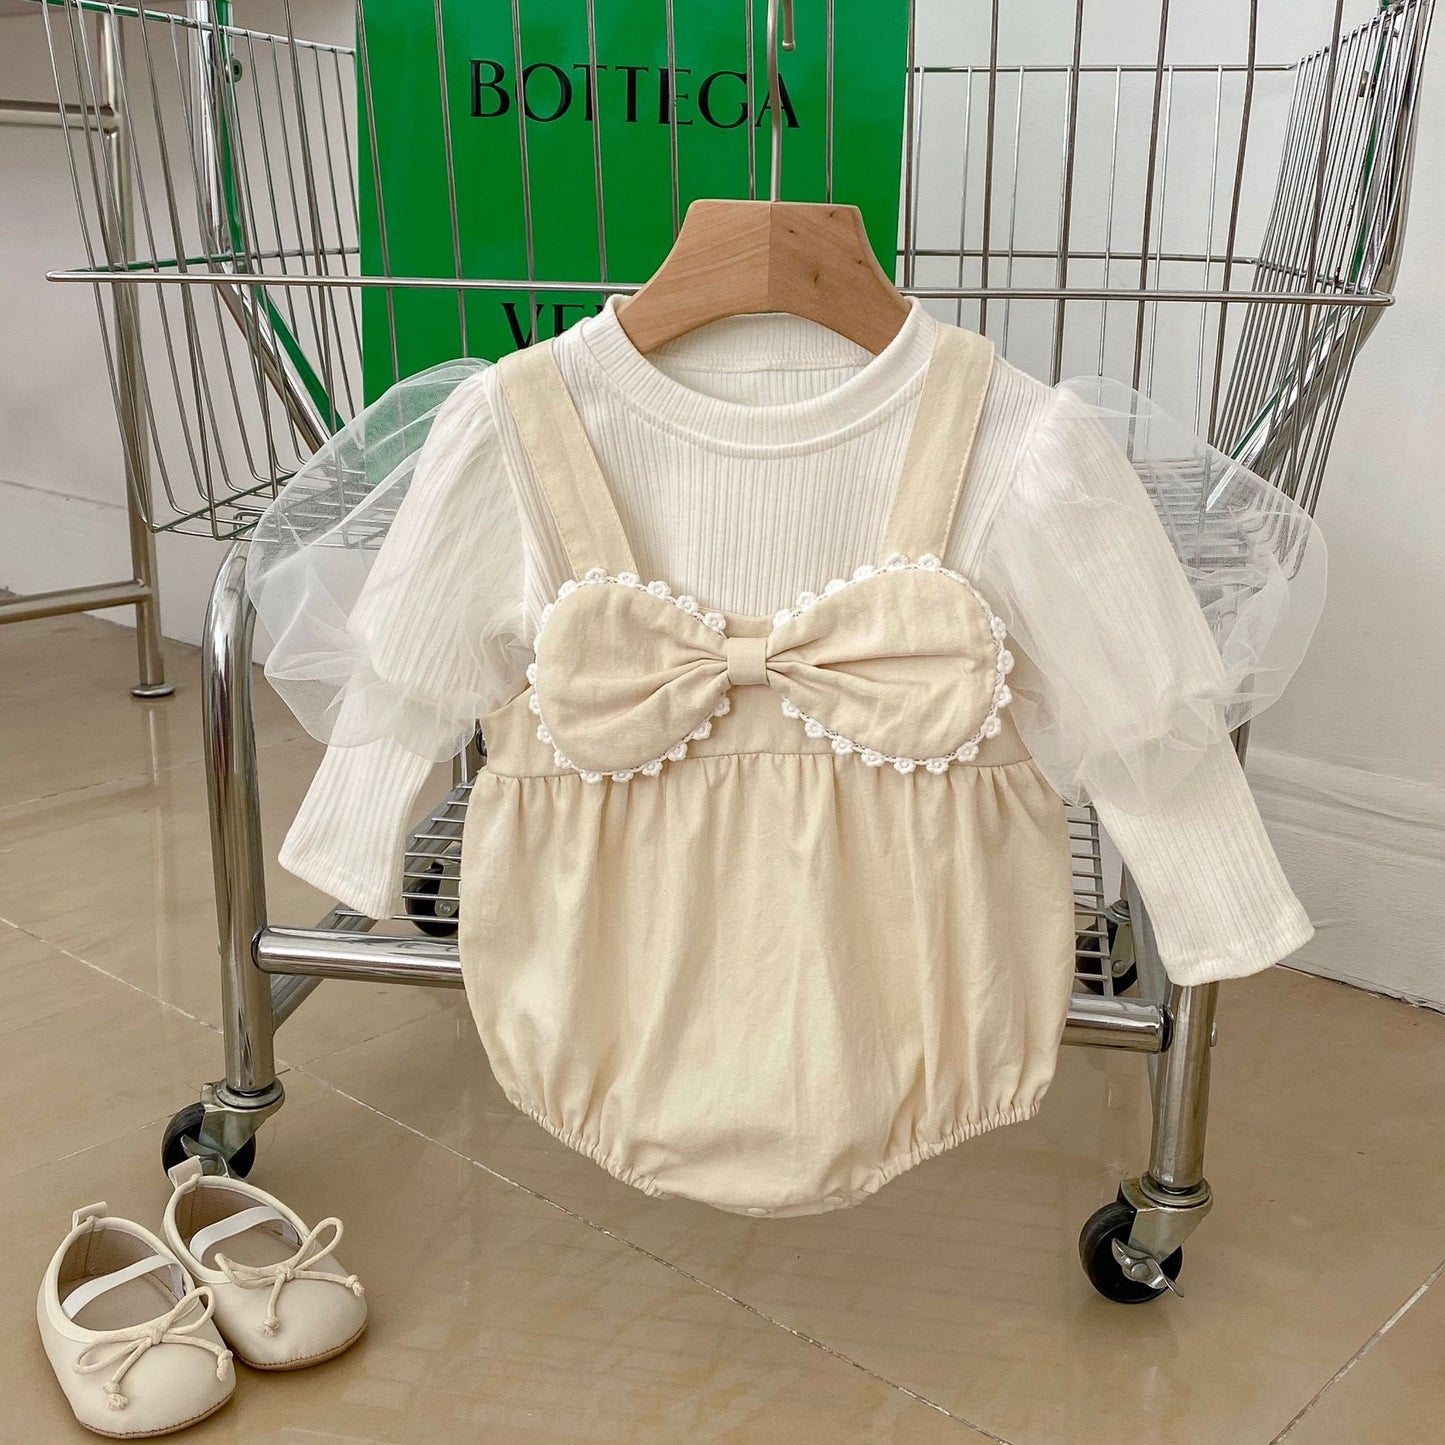 Sweet Style Solid Color Mesh Blouse & Onesie Sets